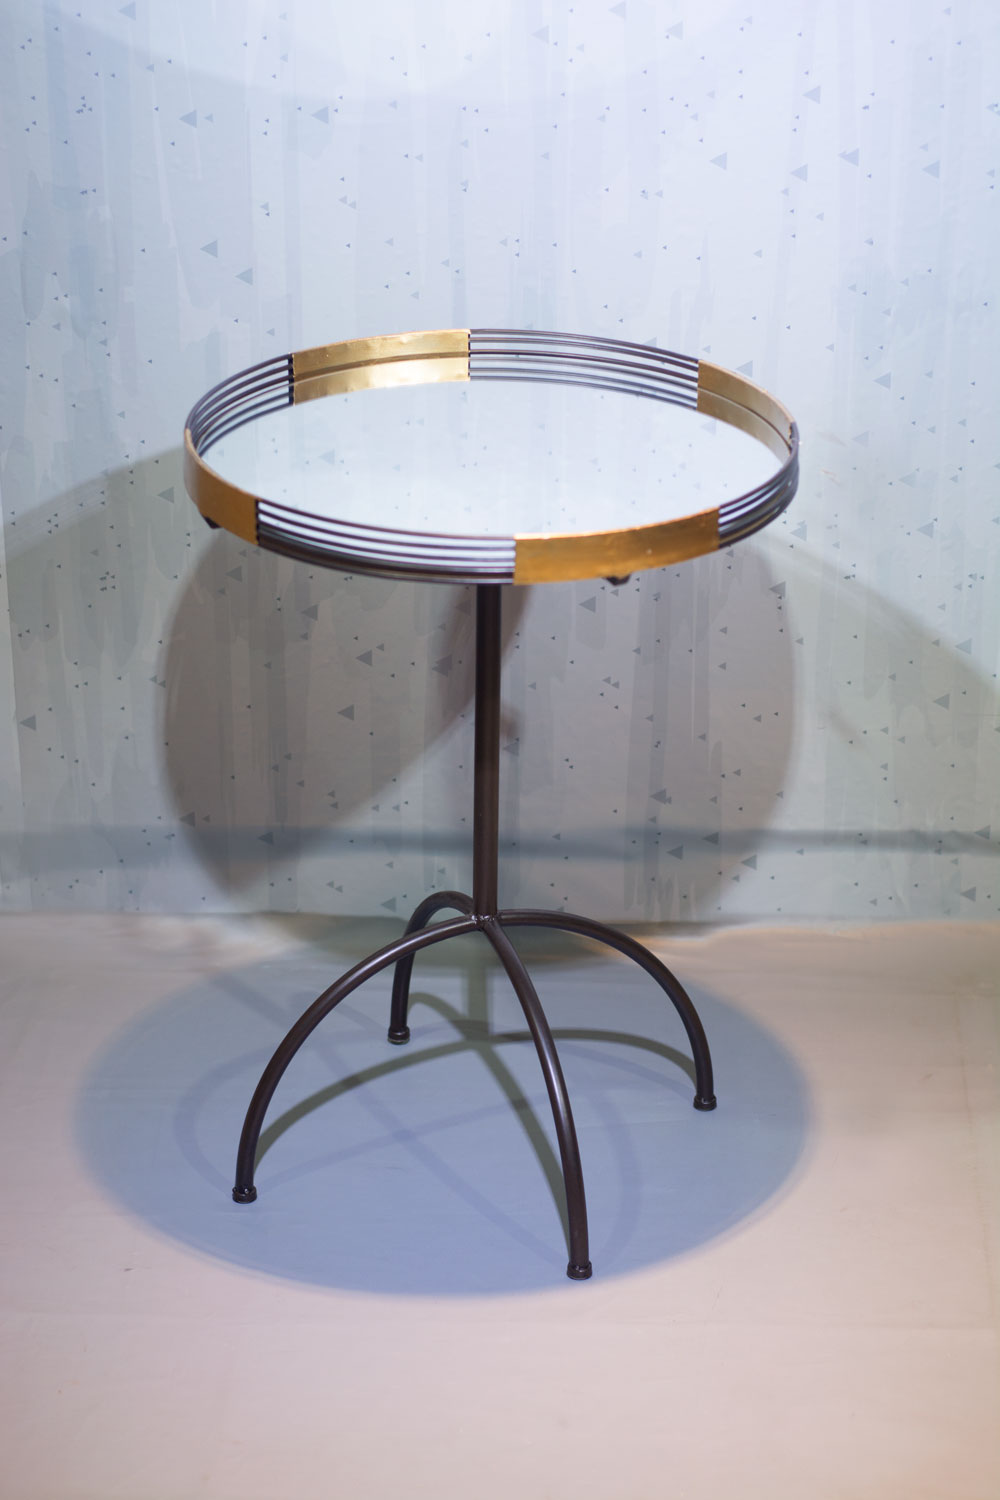 Mirror top metal frame large size coffee table round